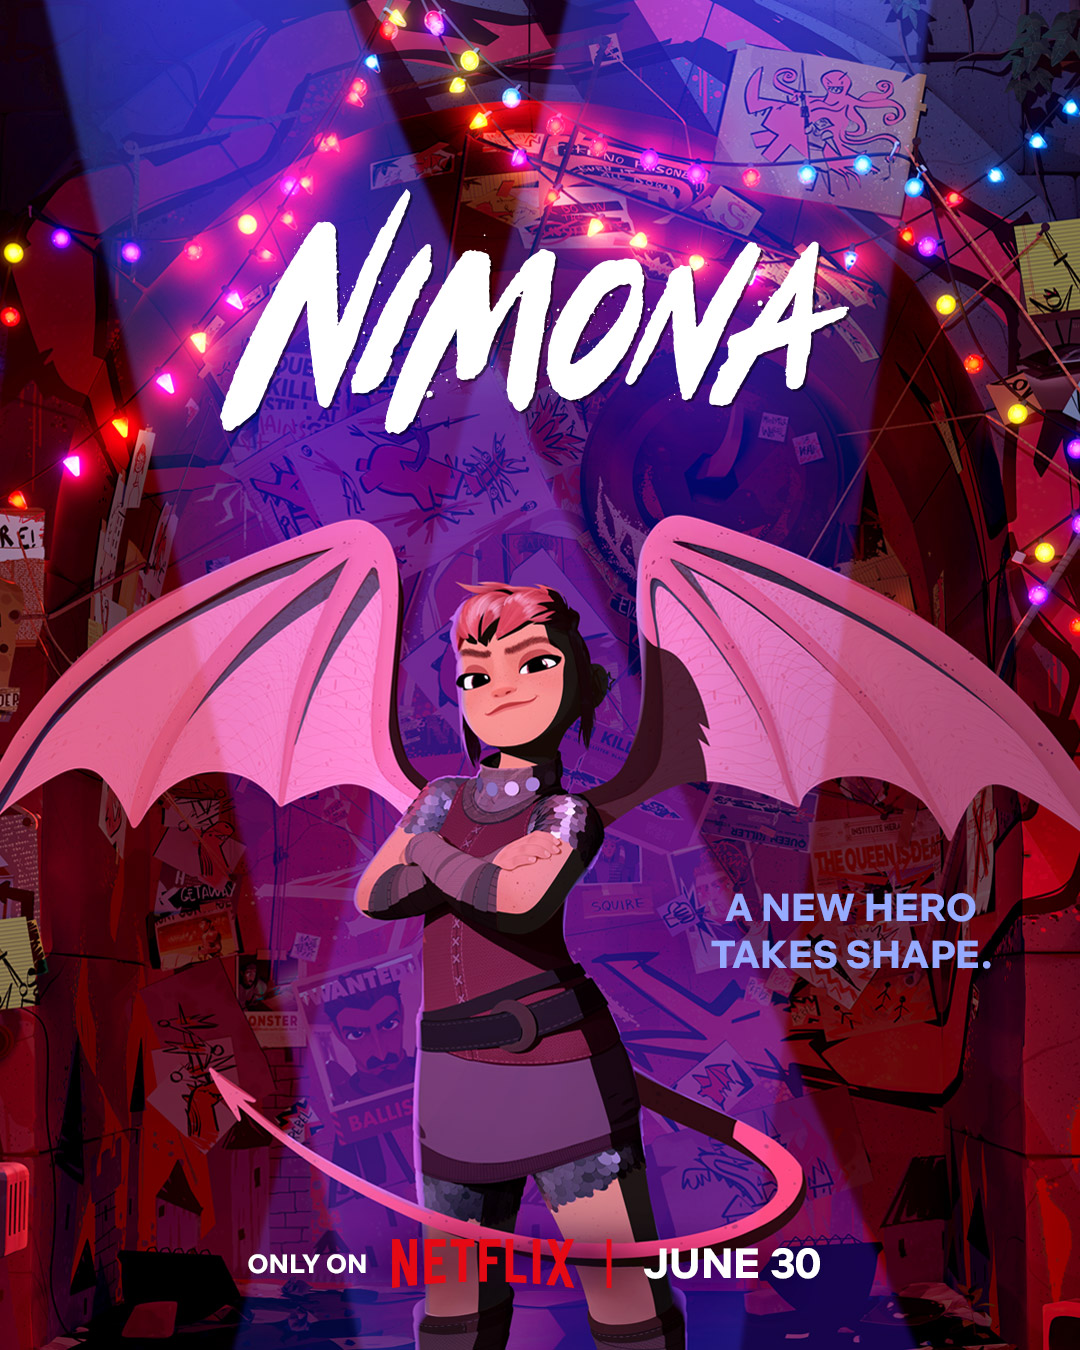 Nimona poster depicts the shapeshifter Nimona with wings